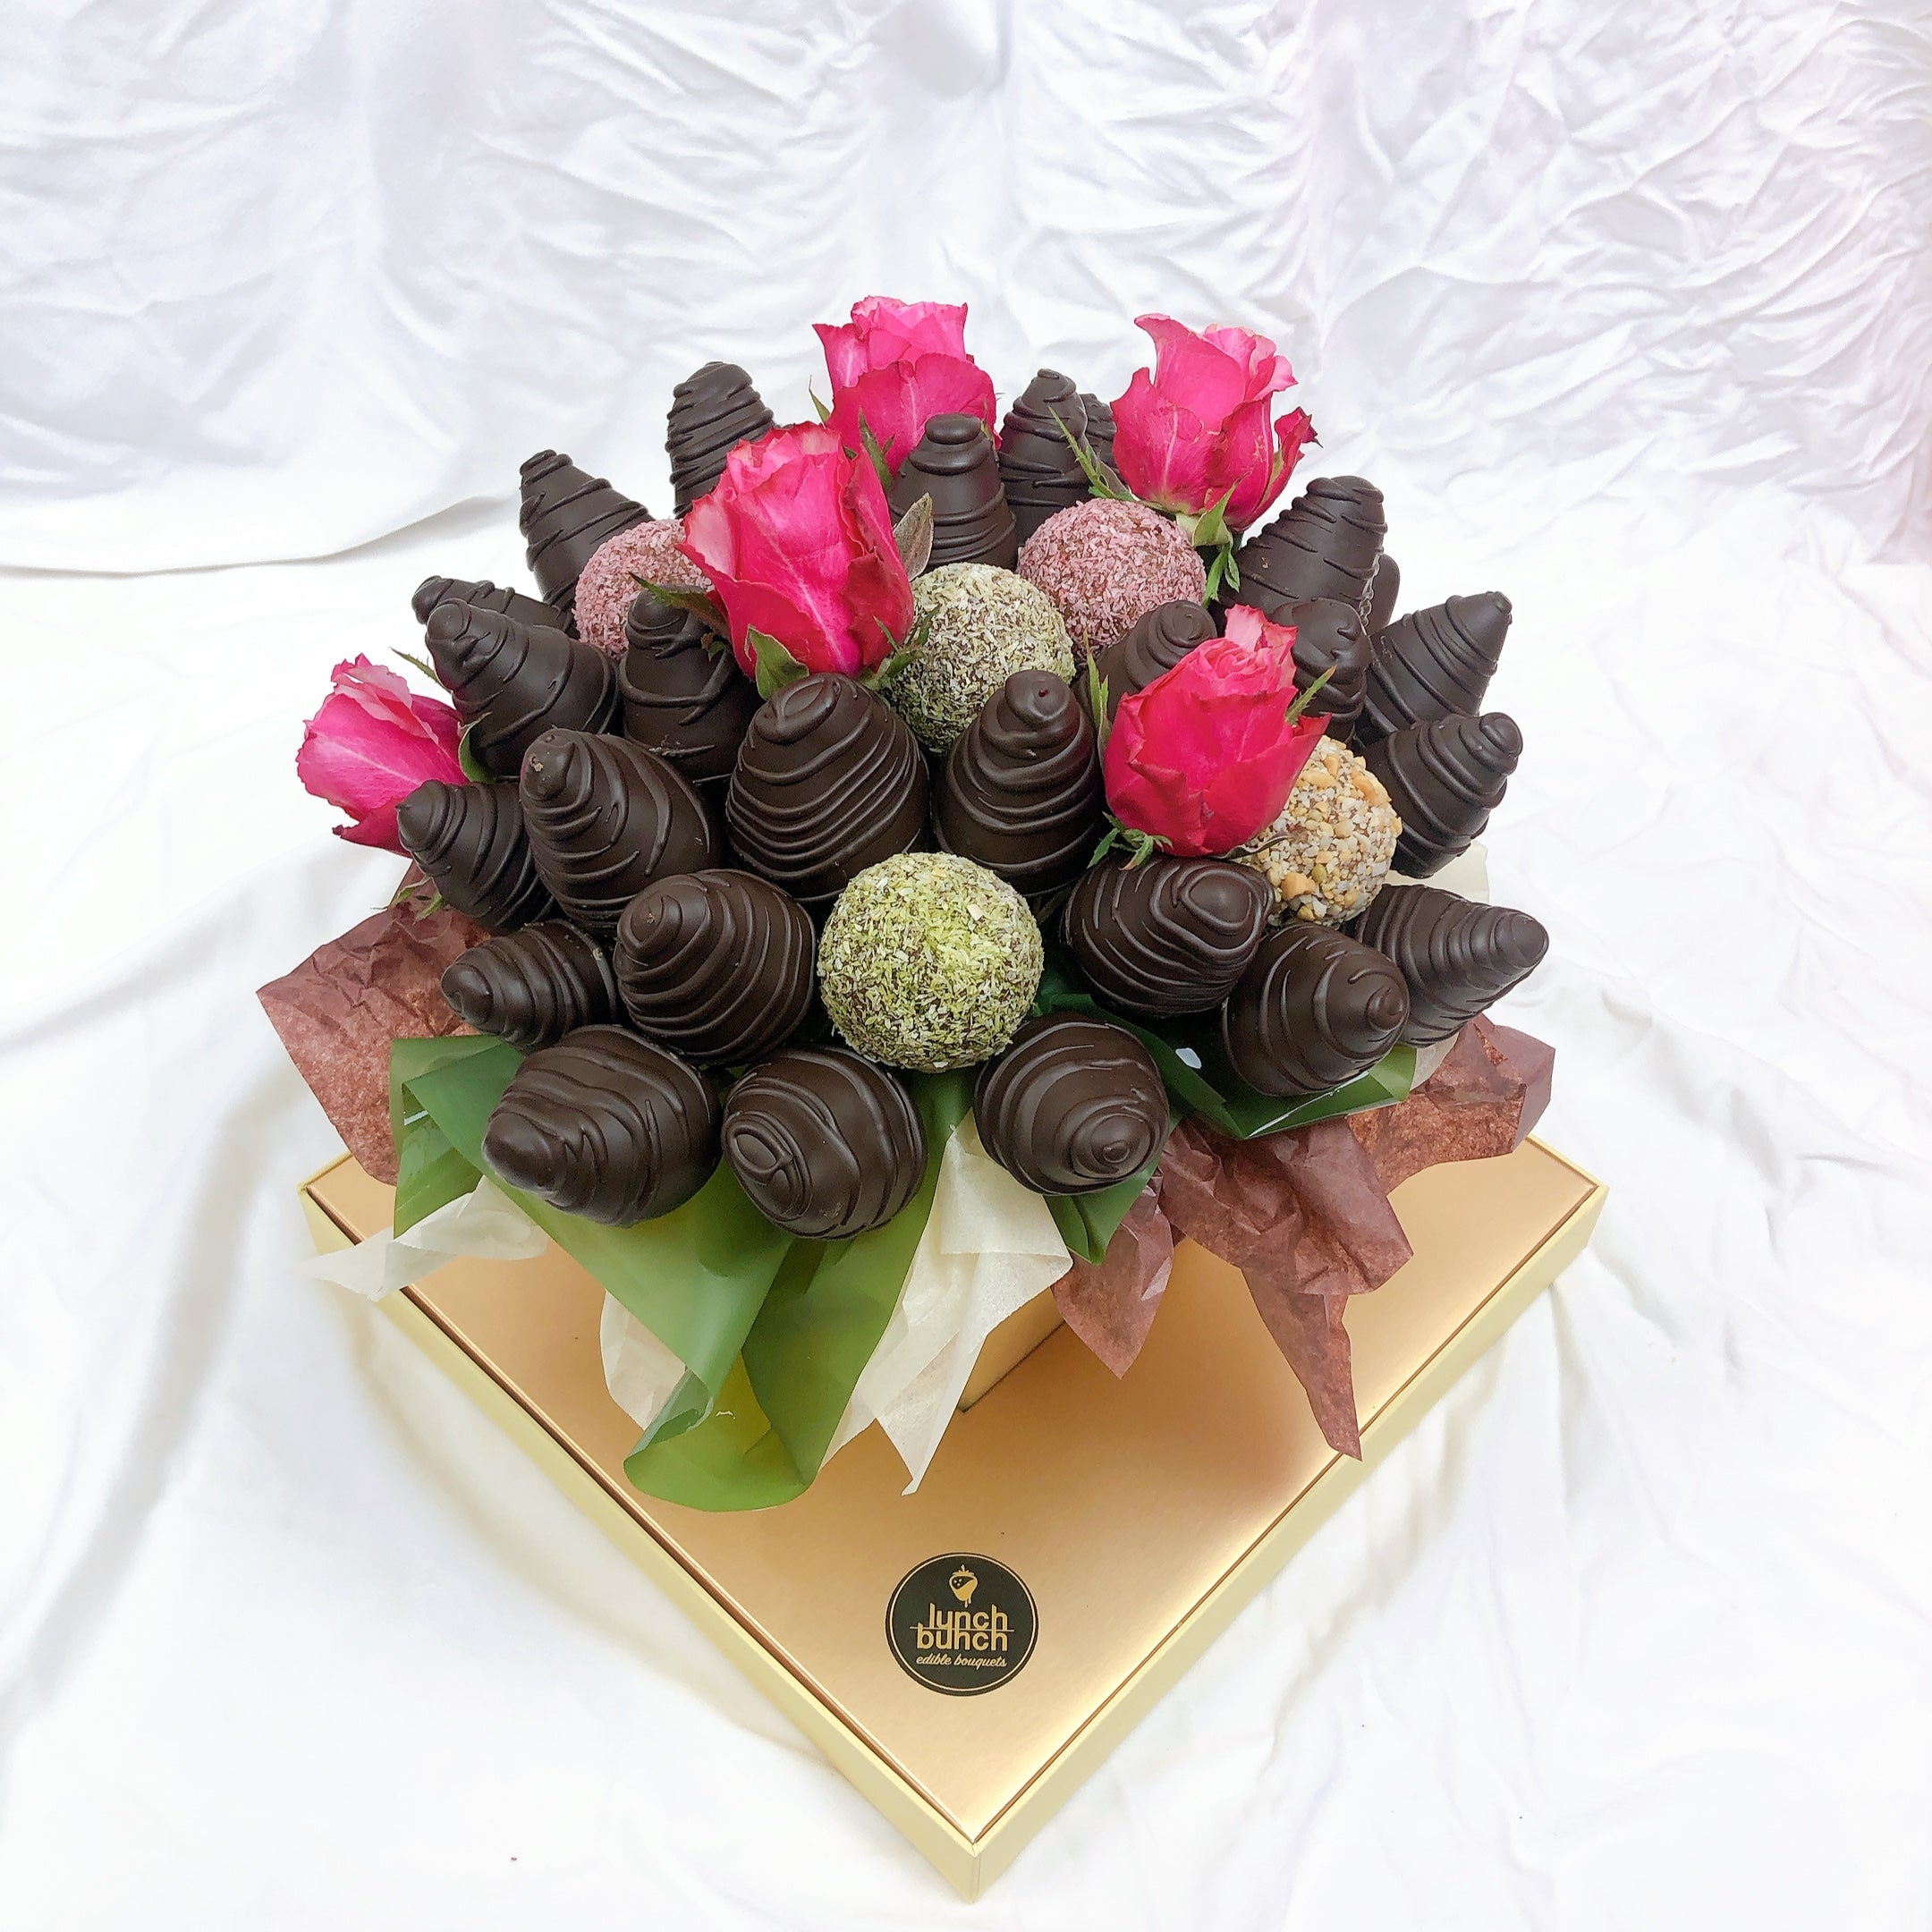 Vegan Chocolate Strawberries & Protein Bliss Balls Bouquet chocolate bouquet order online next day delivery